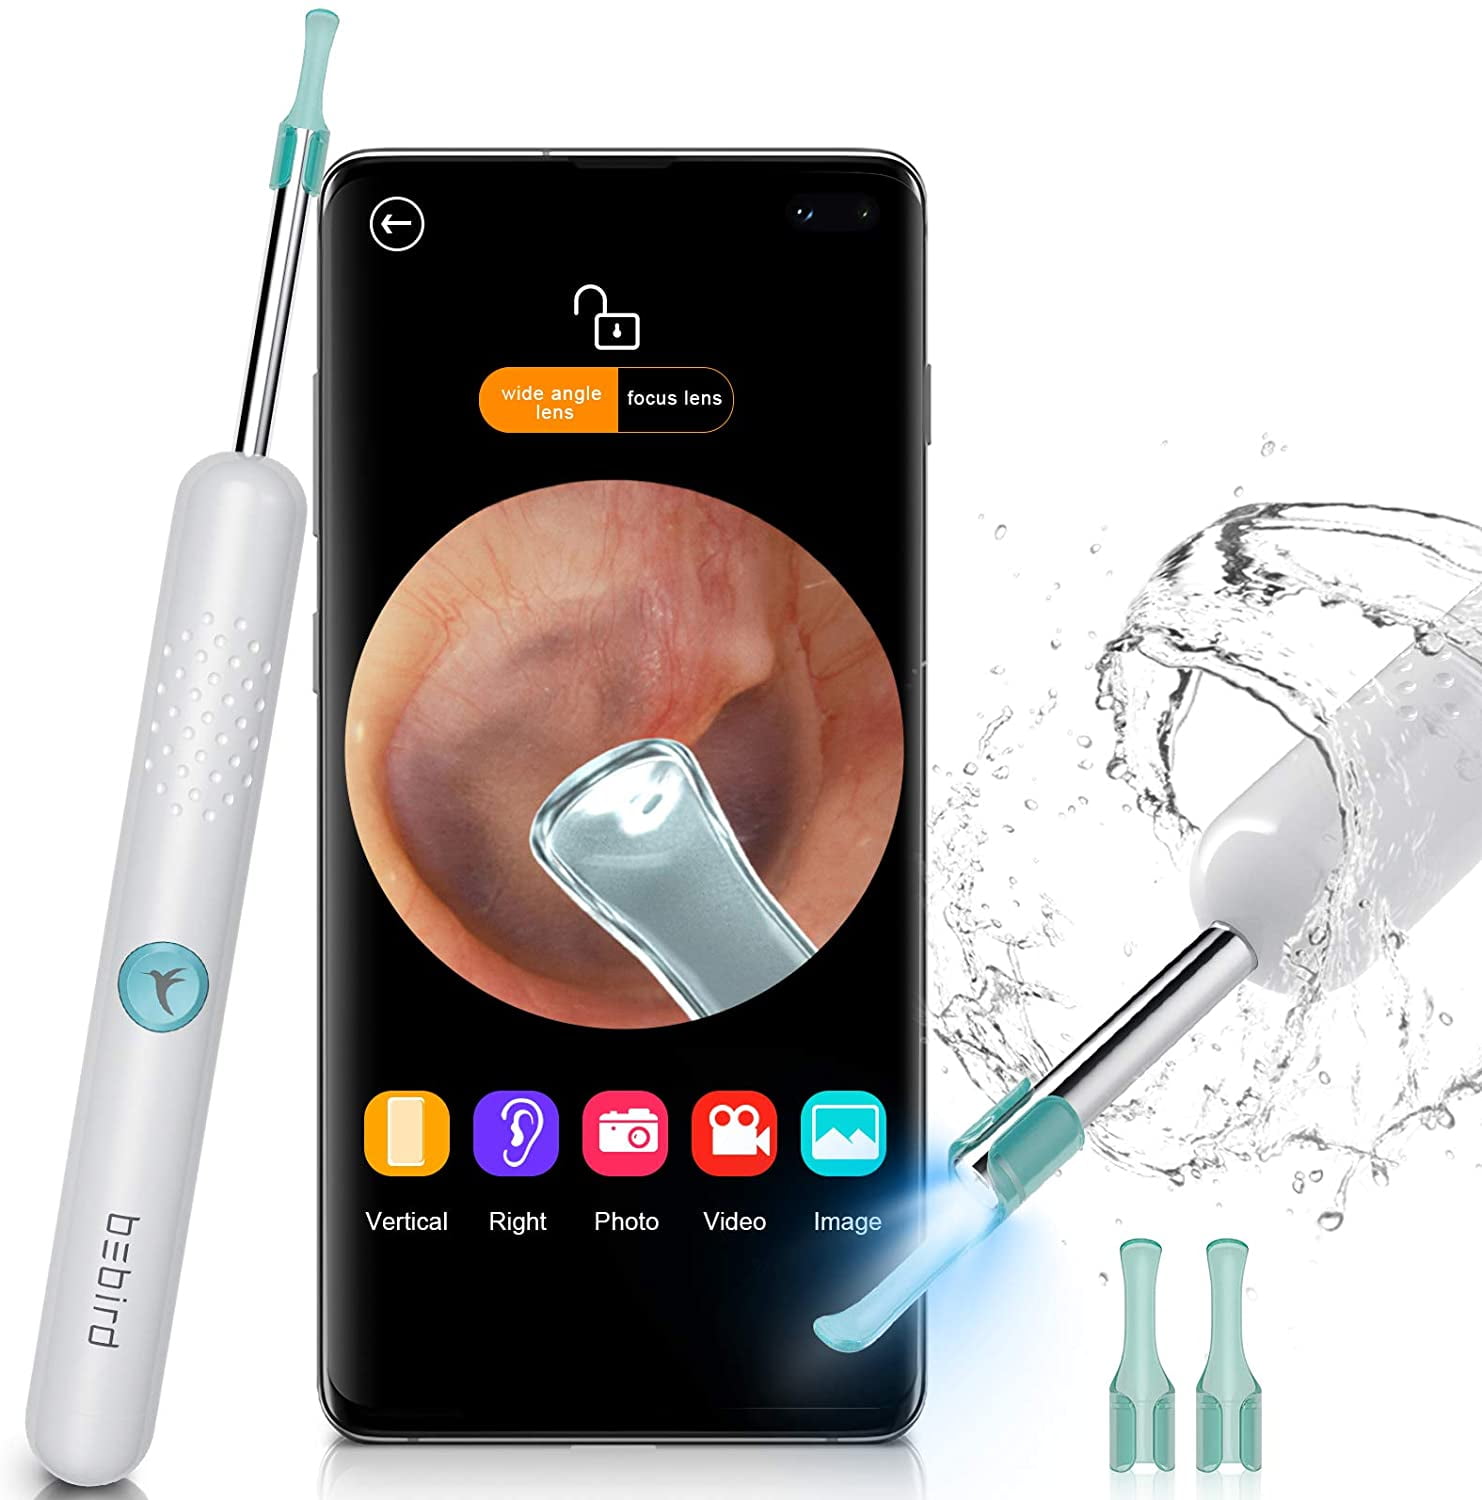 WiFi Visual Ear Cleaning Endoscope Multifunction Scope Camera Digital Inspection Camera with 6 Adjustable LEDs for iOS Android PC 